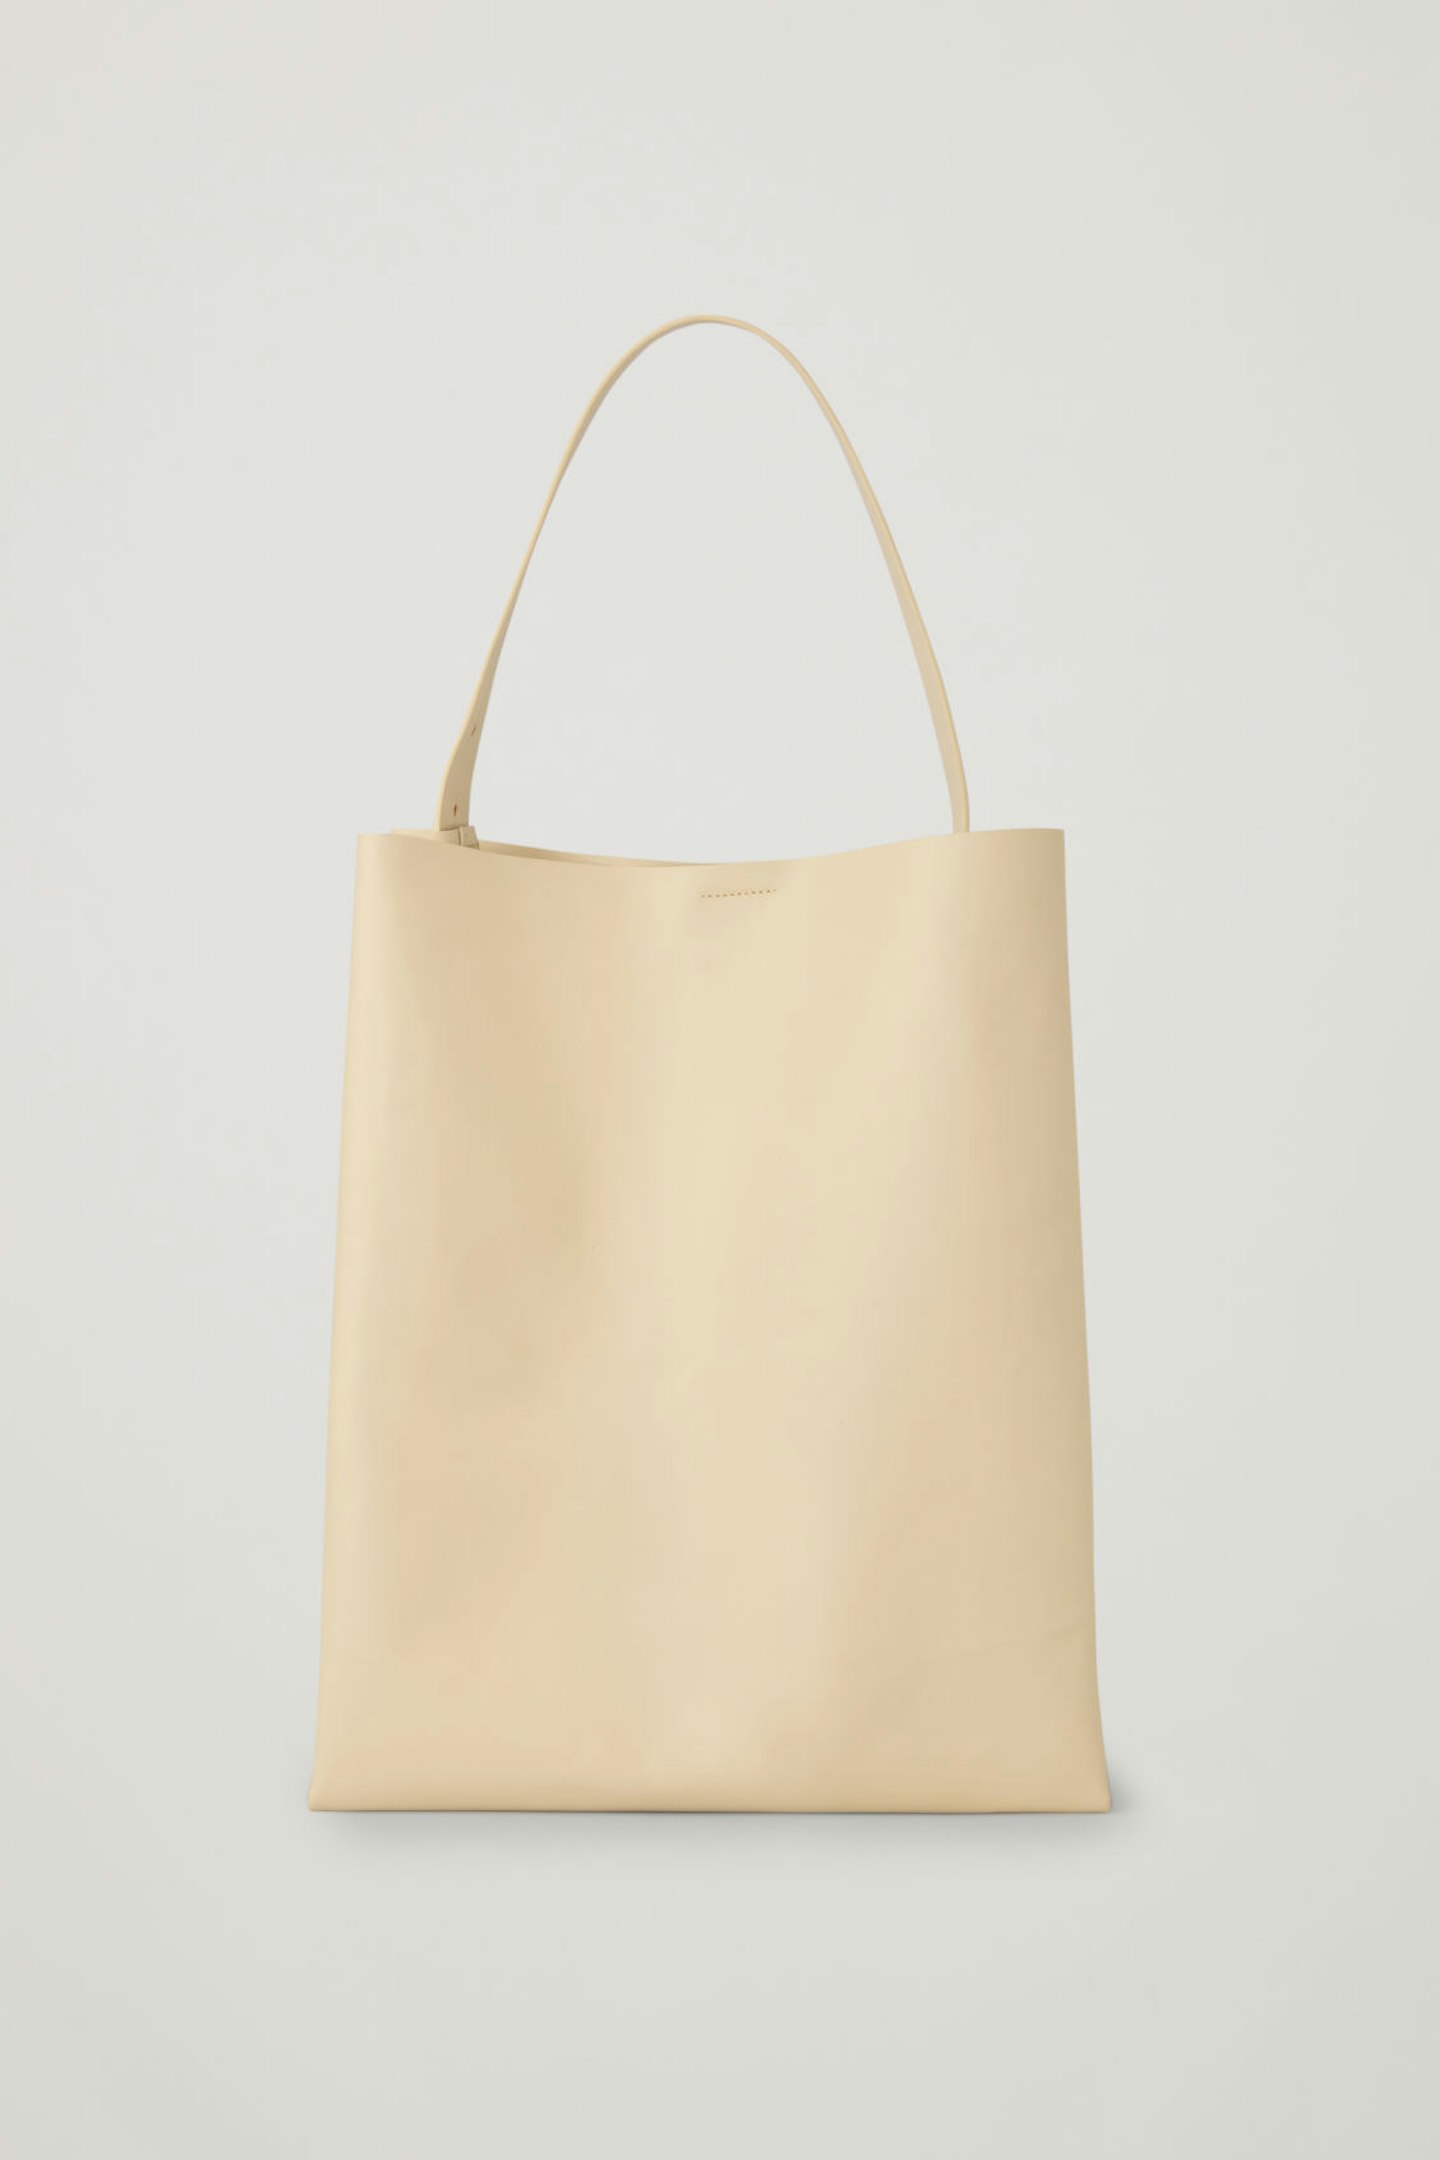 COS, Leather Tote Bag, £225